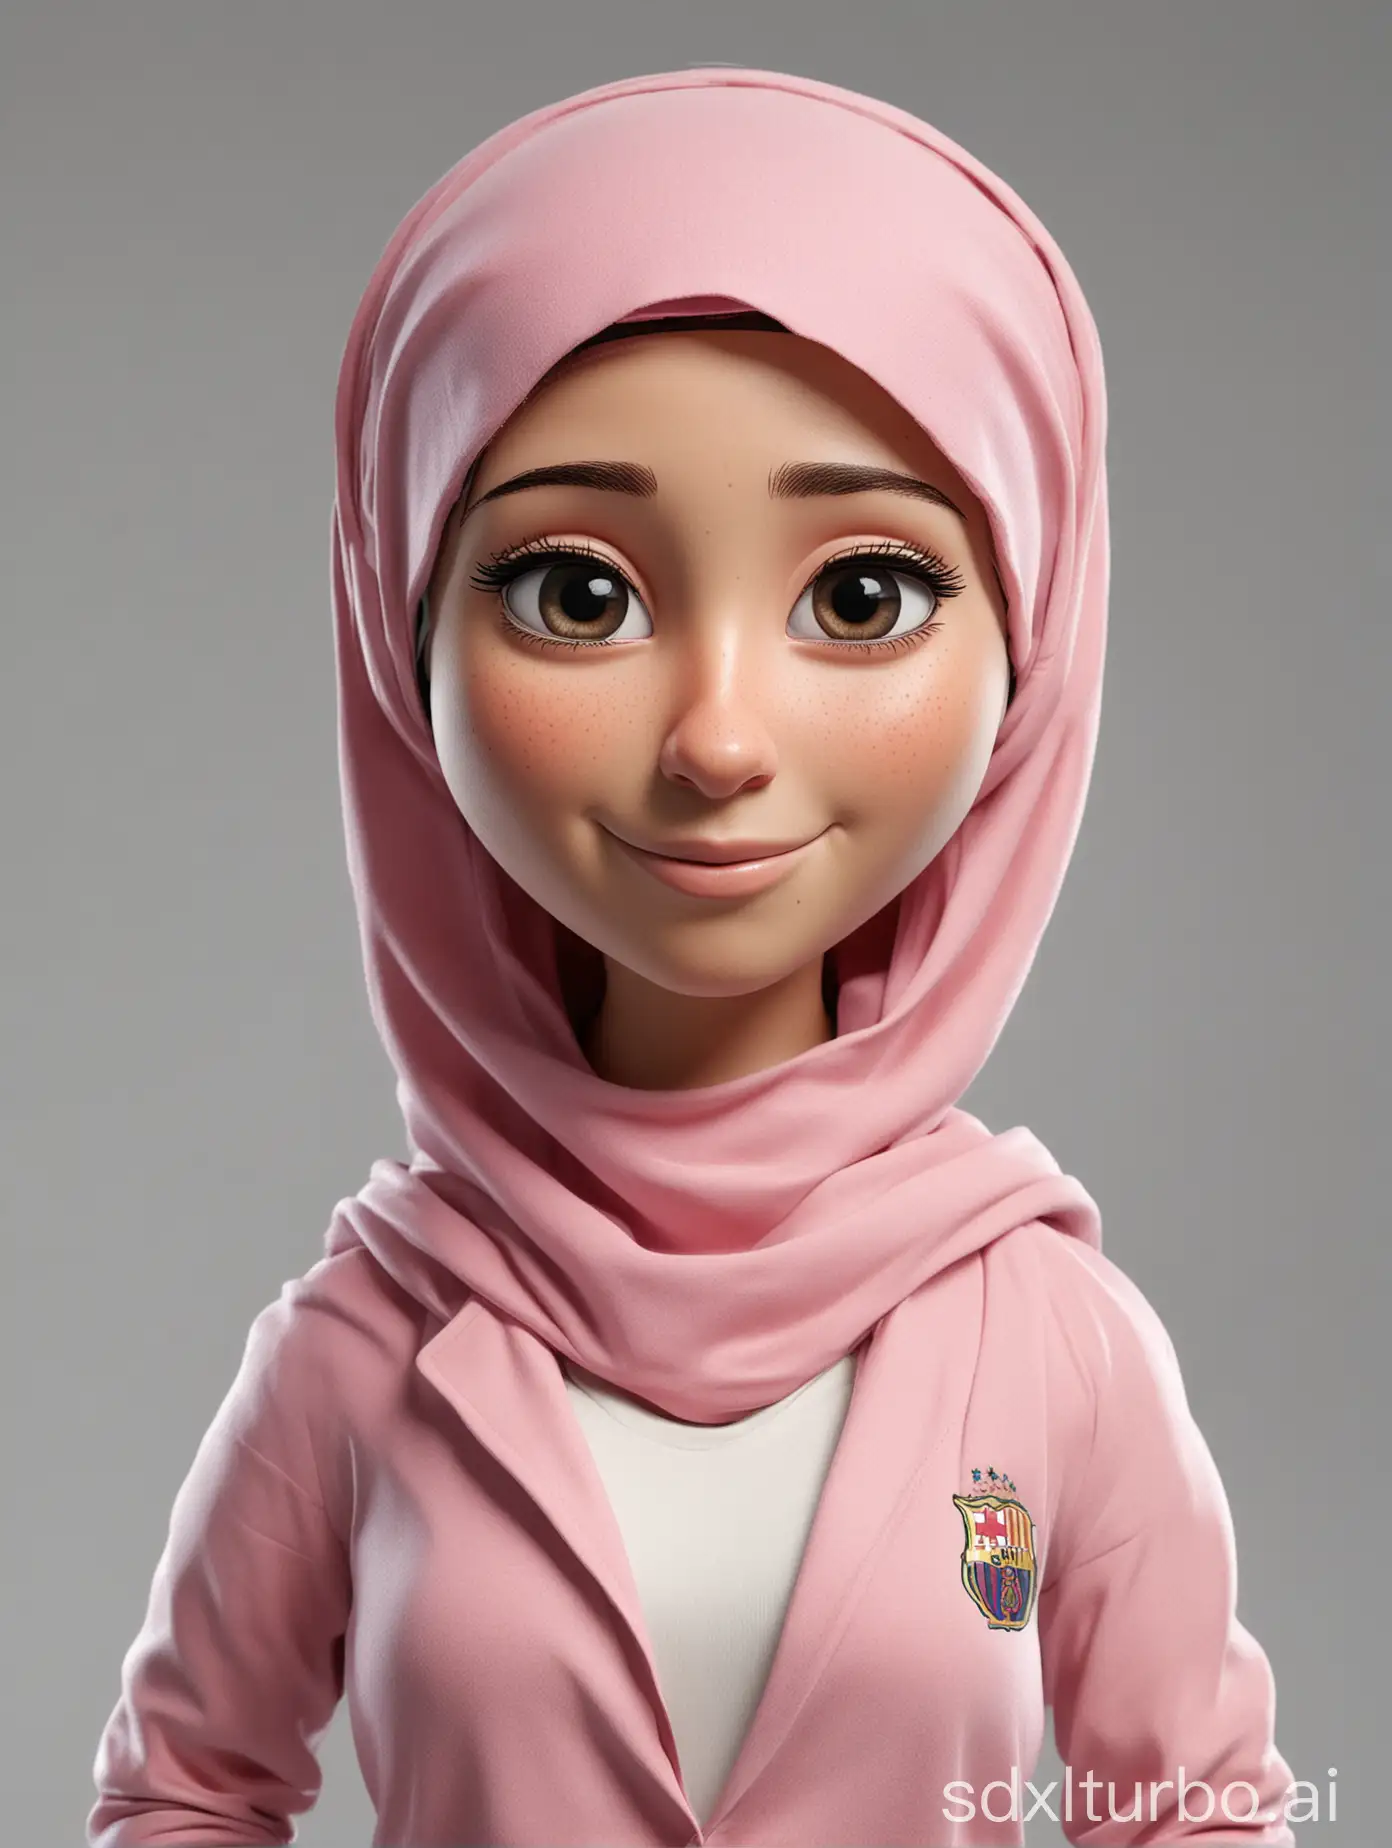 Create a full 3D cartoon style body with a big head. leo messi. slightly round eyes, clean white skin, thin sweet smile. wearing a hijab, pink blazer, white undershirt, body position clearly visible. The background is solid white. Use soft photography lighting, hair lighting, top lighting, side lighting. Highest quality photos, Uhd,16k